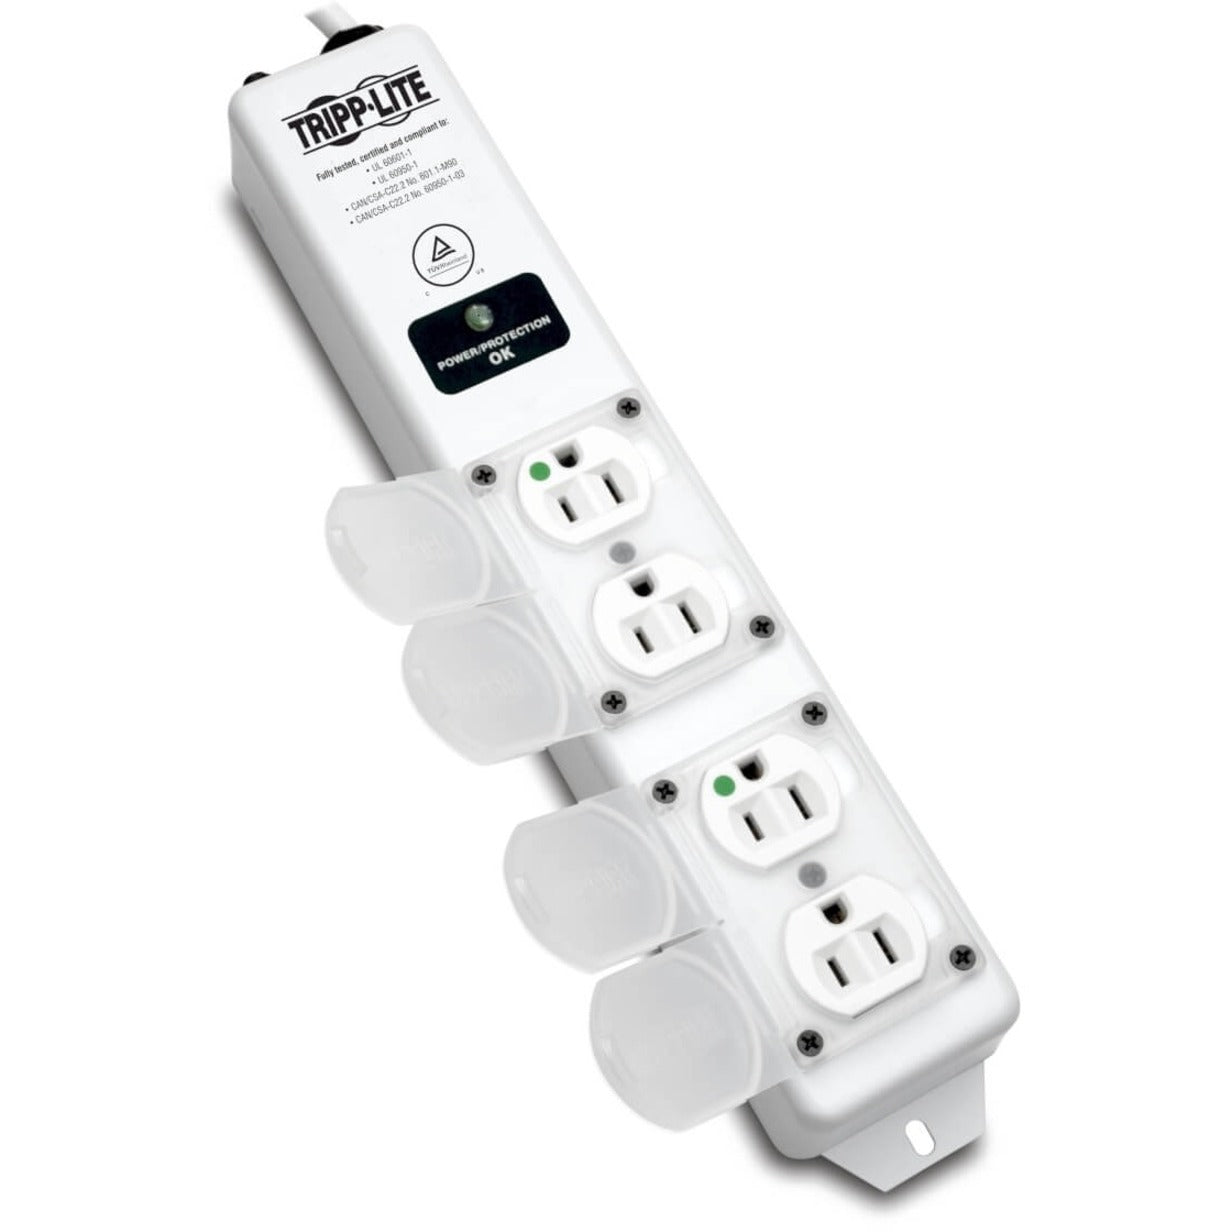 Tripp Lite Safe-IT UL 60601-1 Medical-Grade Surge Protector for Patient-Care Vicinity 4x Hospital-Grade Outlets 15 ft. Cord Antimicrobial Protection